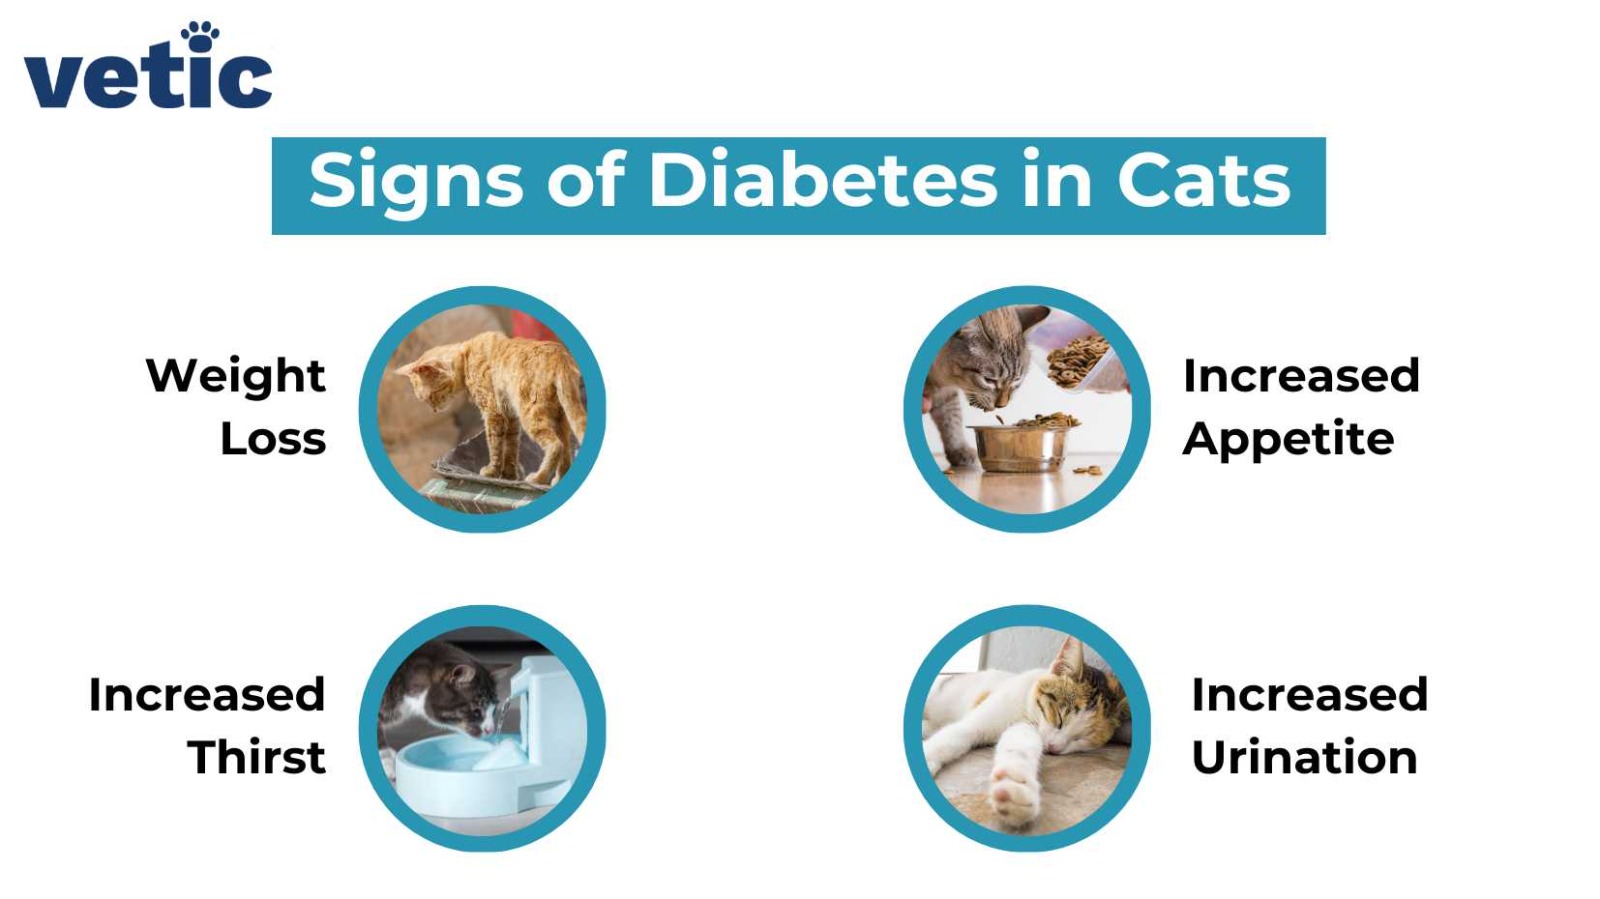 infographic on Diabetes in Cats. the signs of diabetes include weight loss, increased appetite, increased urination and increased thirst.